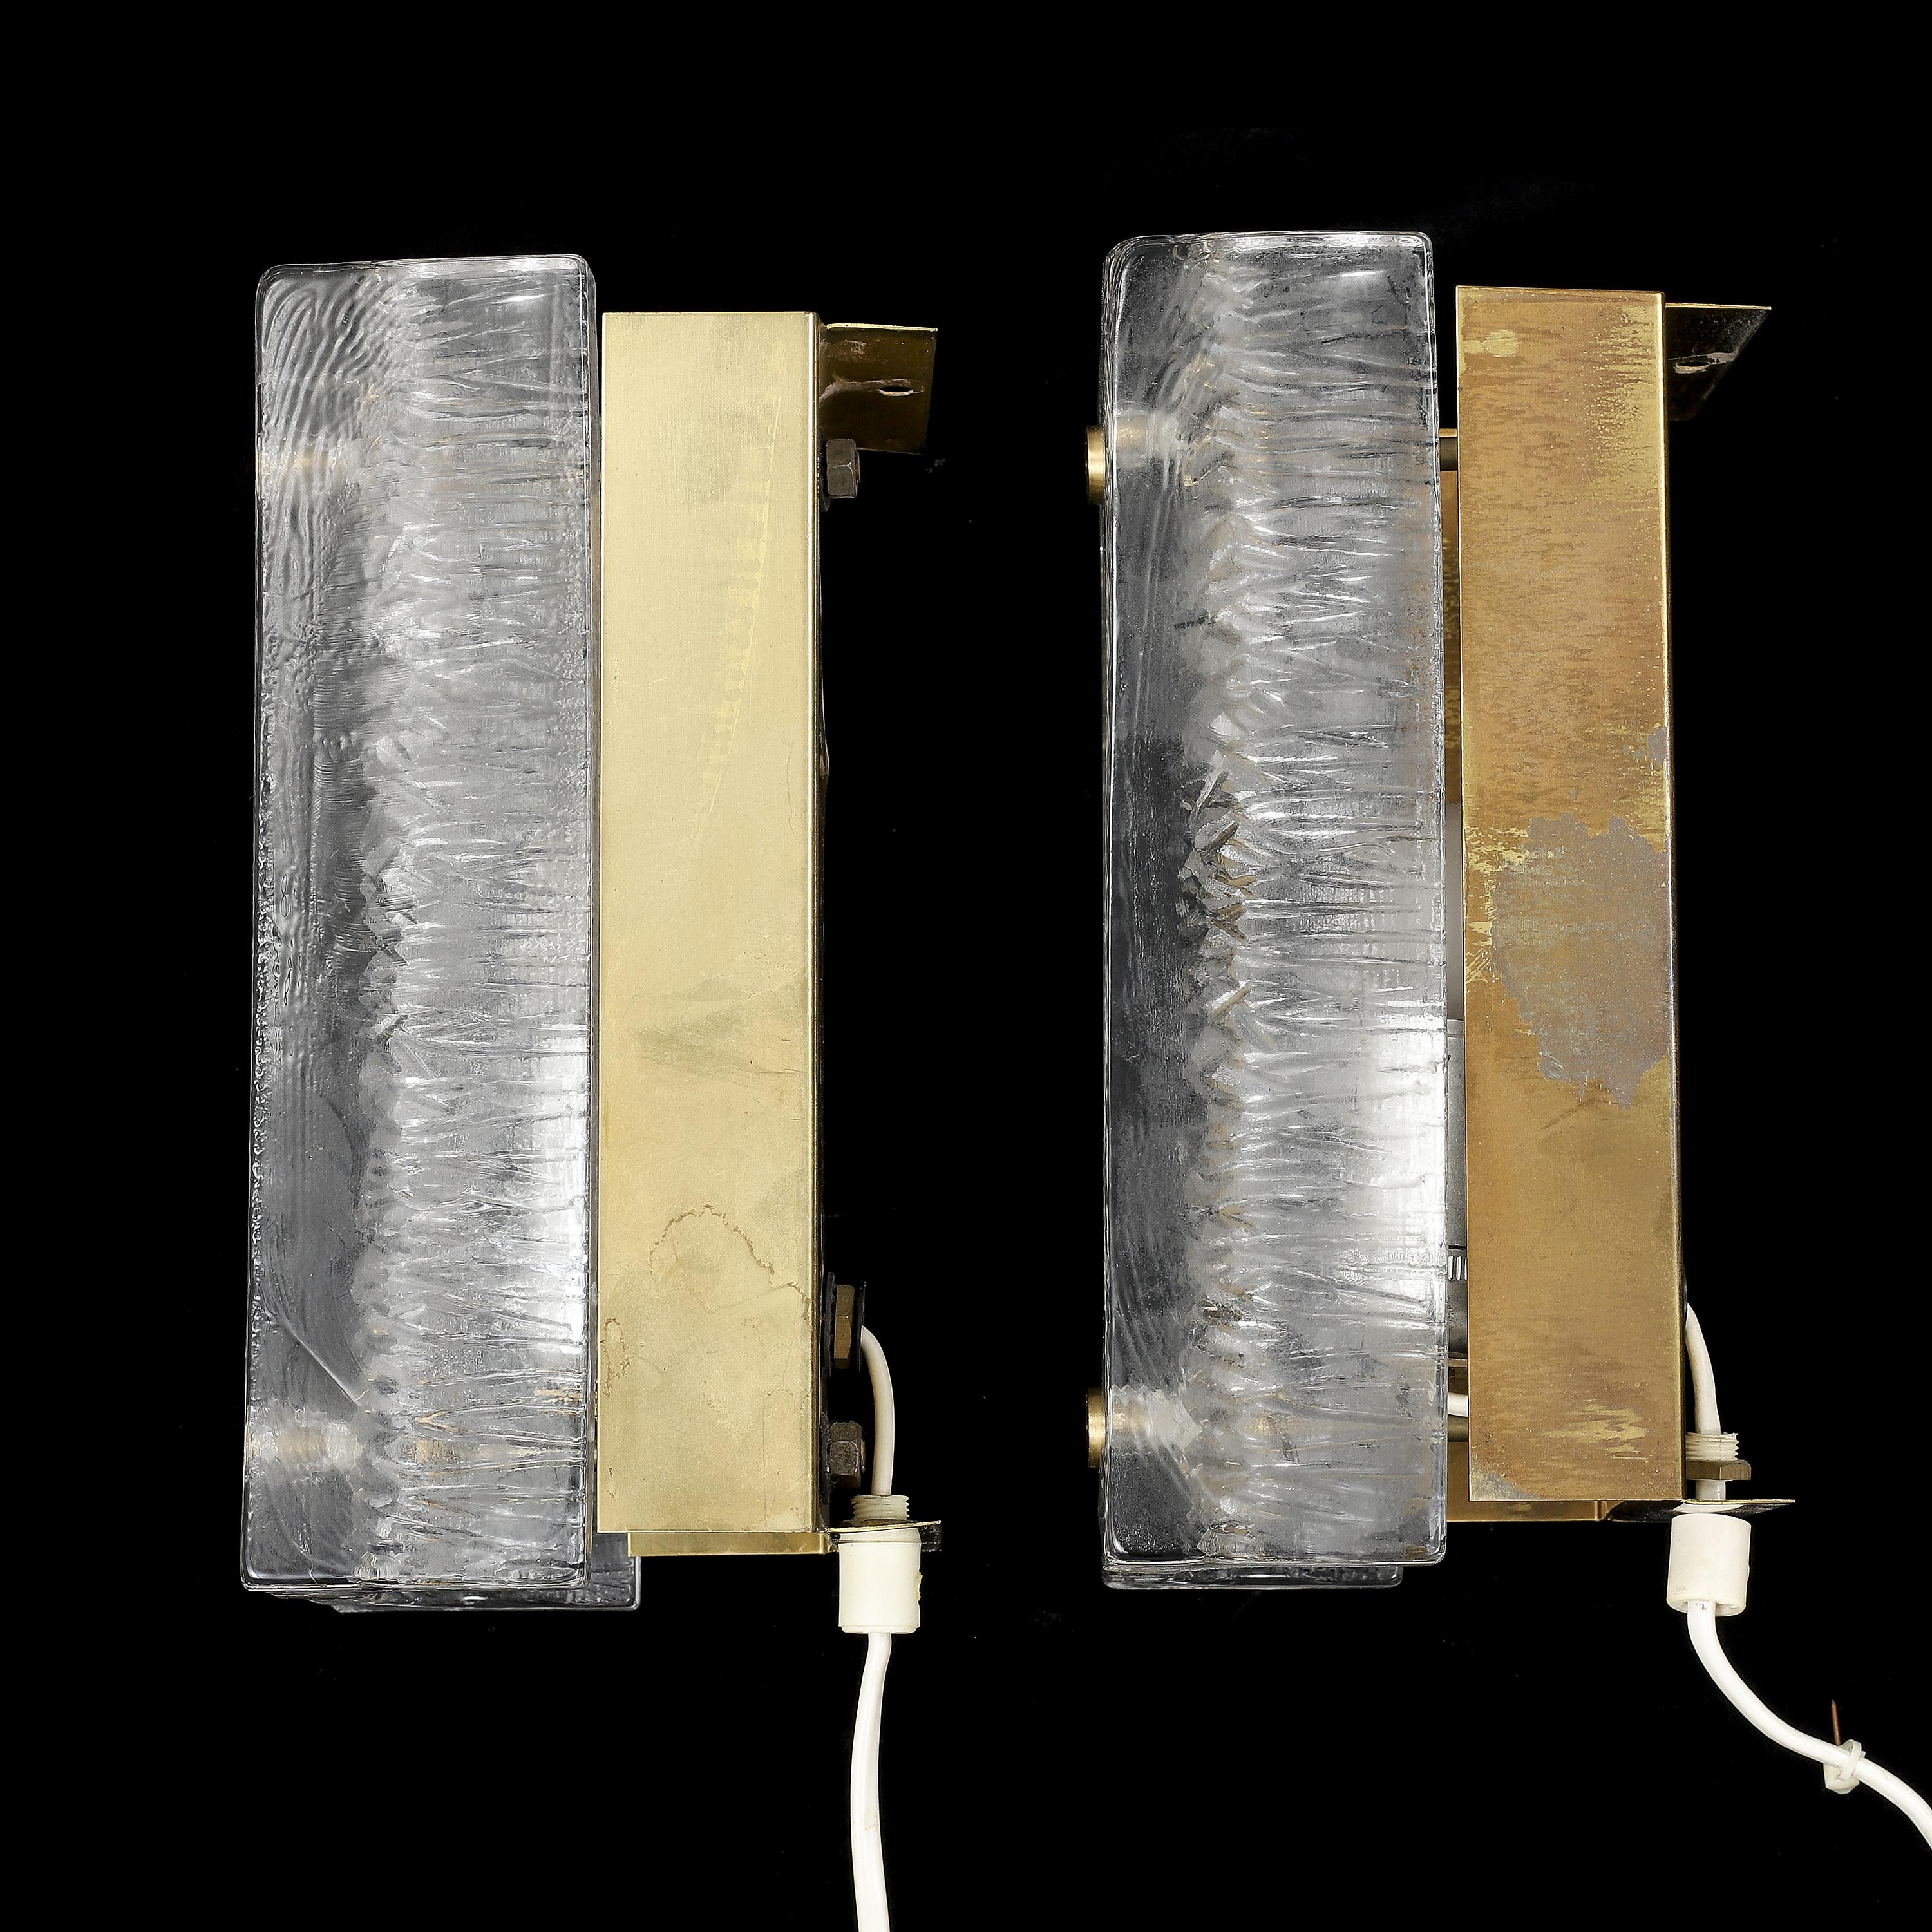 Orrefors wall light  cast glass and brass made in Sweden 1960.
Price for the pair
made of clear cast crystal glass , smooth surface outer glass and an inside pattern, glass shades are resting on a brass frame with brass fasteners. Hold one